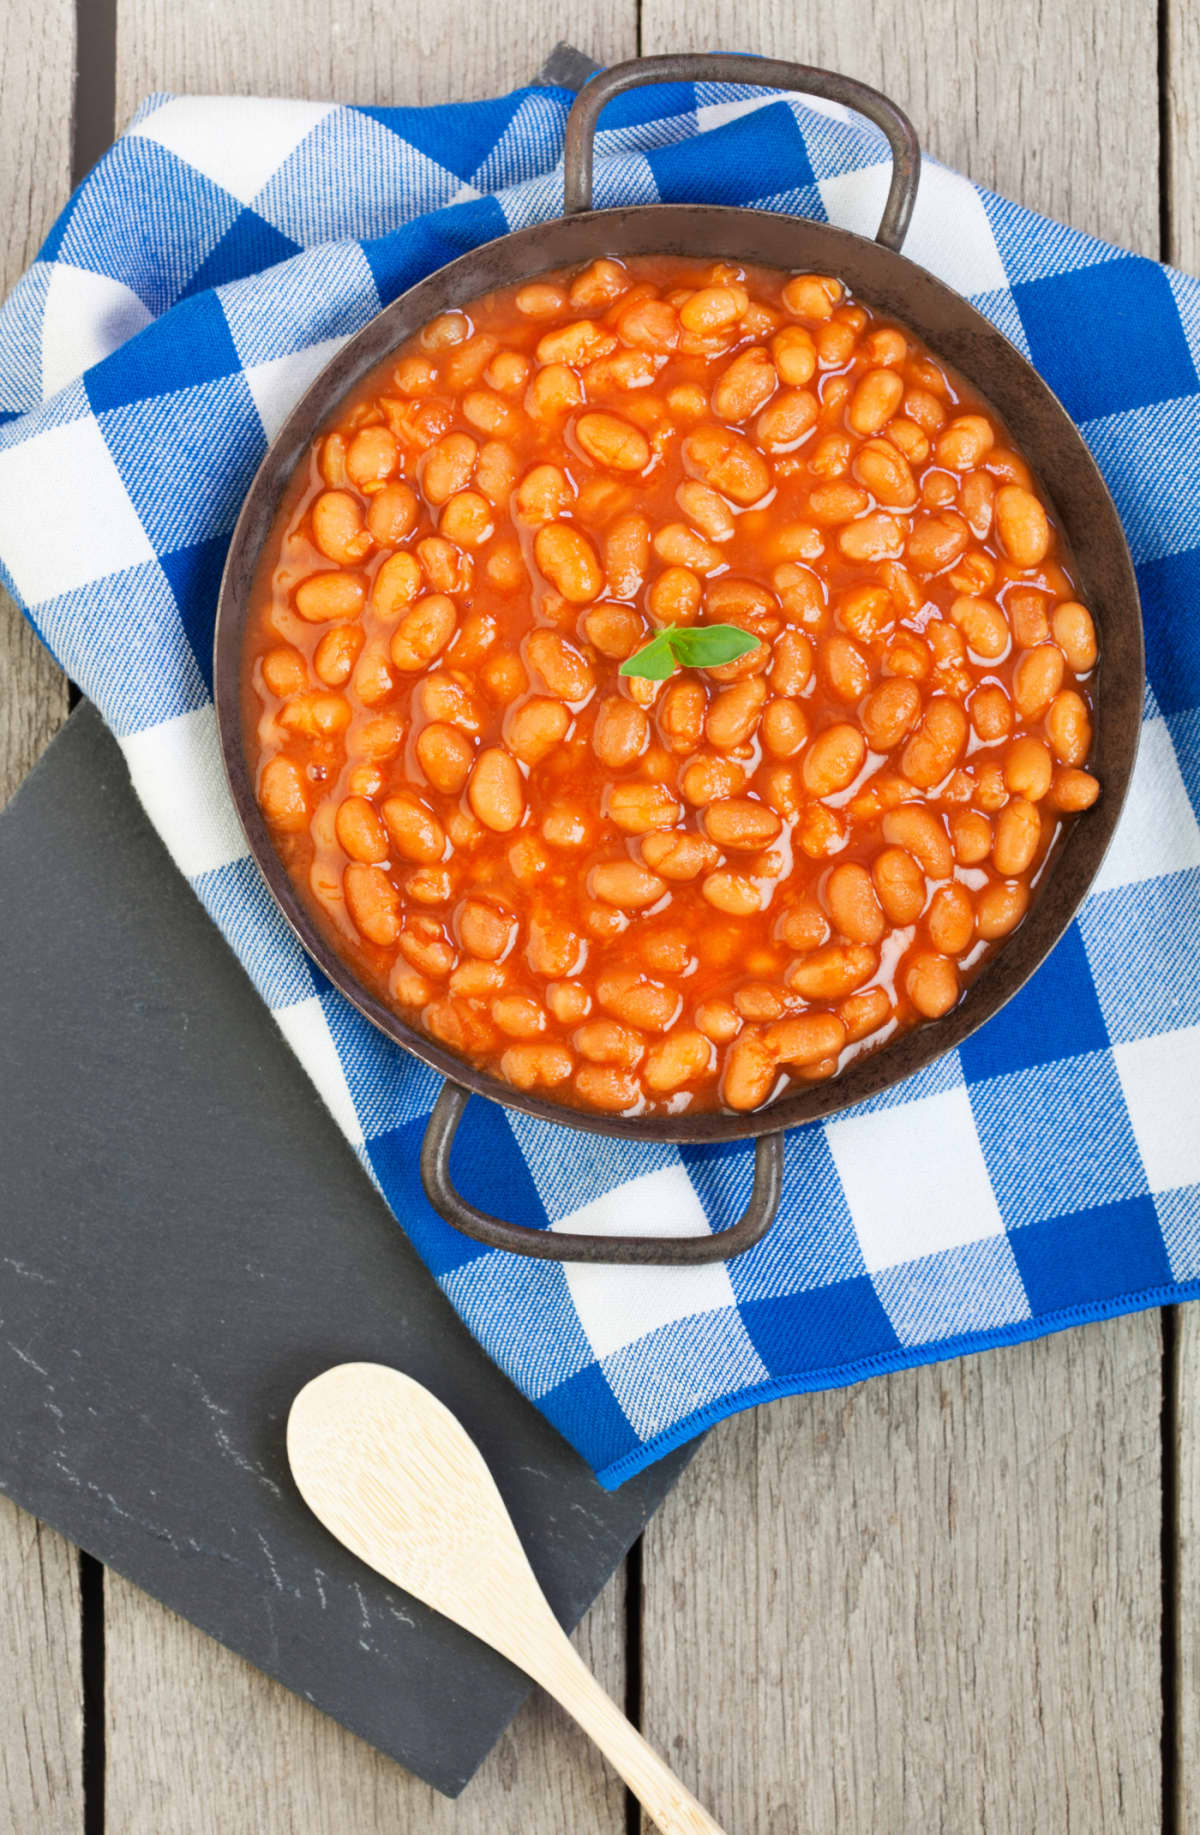 Classic baked beans in a rustic antique pan.